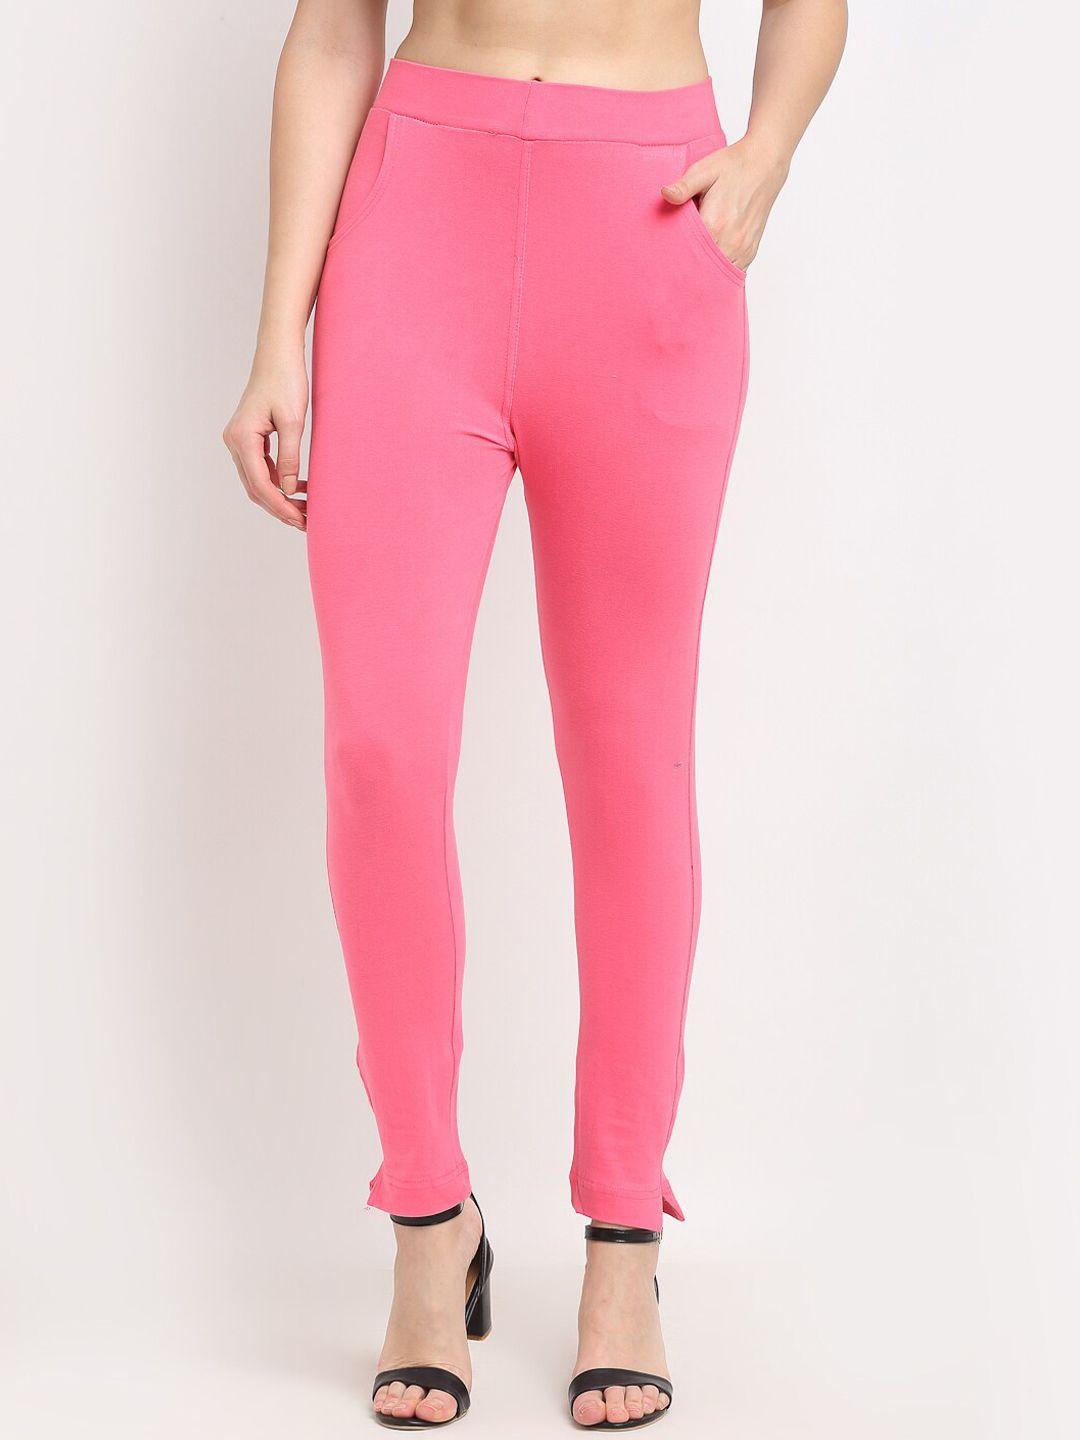 tag-7-women-pink-solid-ankle-length-leggings